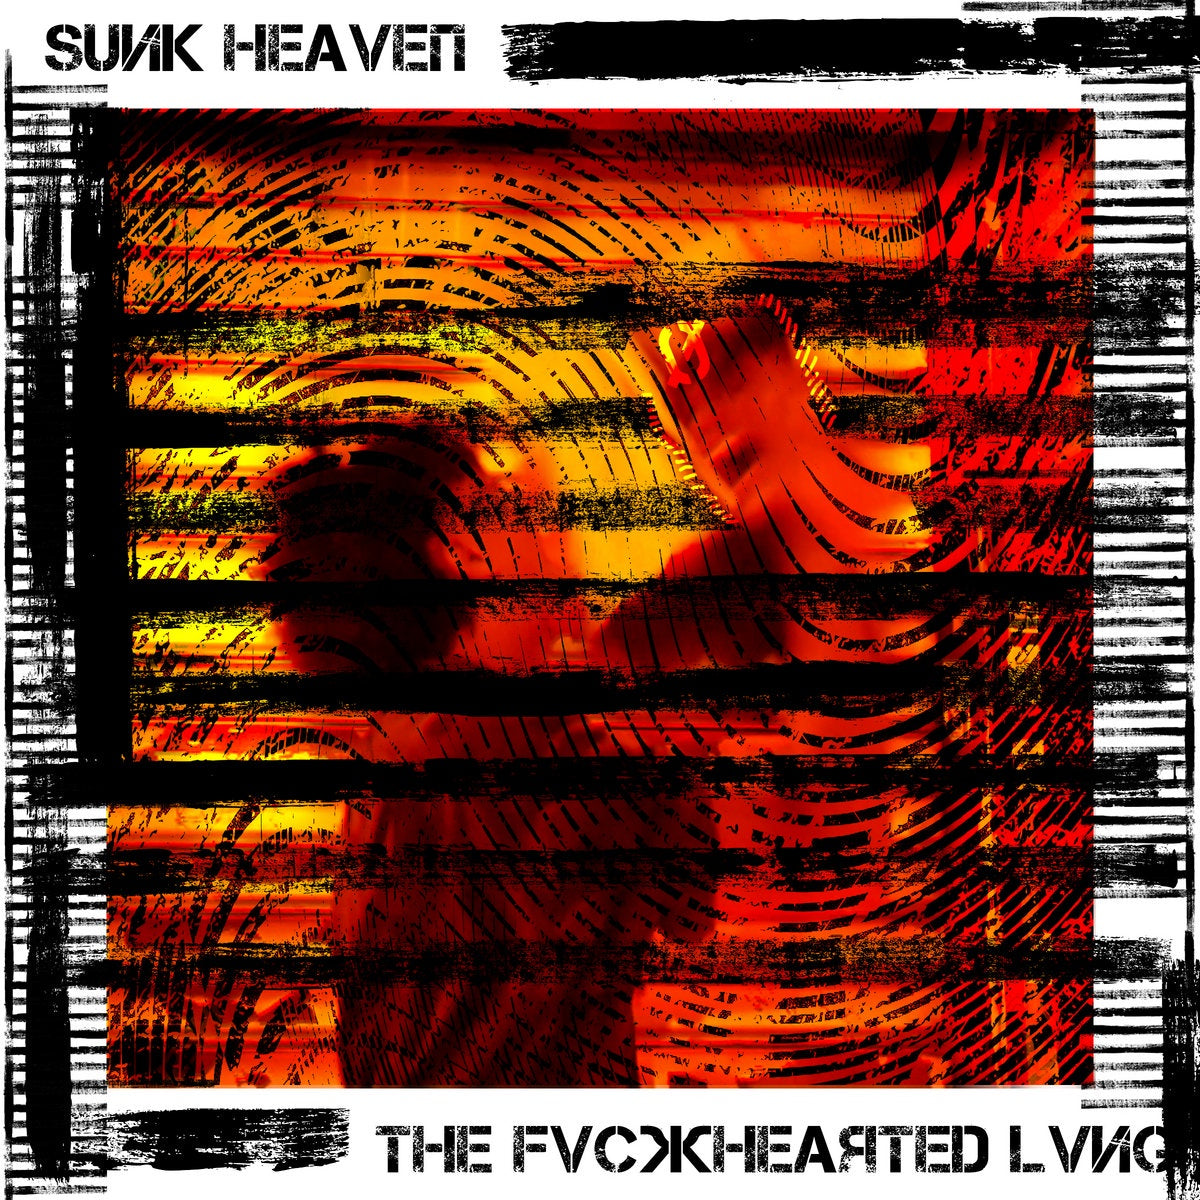 Sunk Heaven - THE FVCKHEAѪTED LVNG - New LP Record 2021 American Dreams Transparent Red Vinyl & Download - Experimental Electronic / Noise / Dub